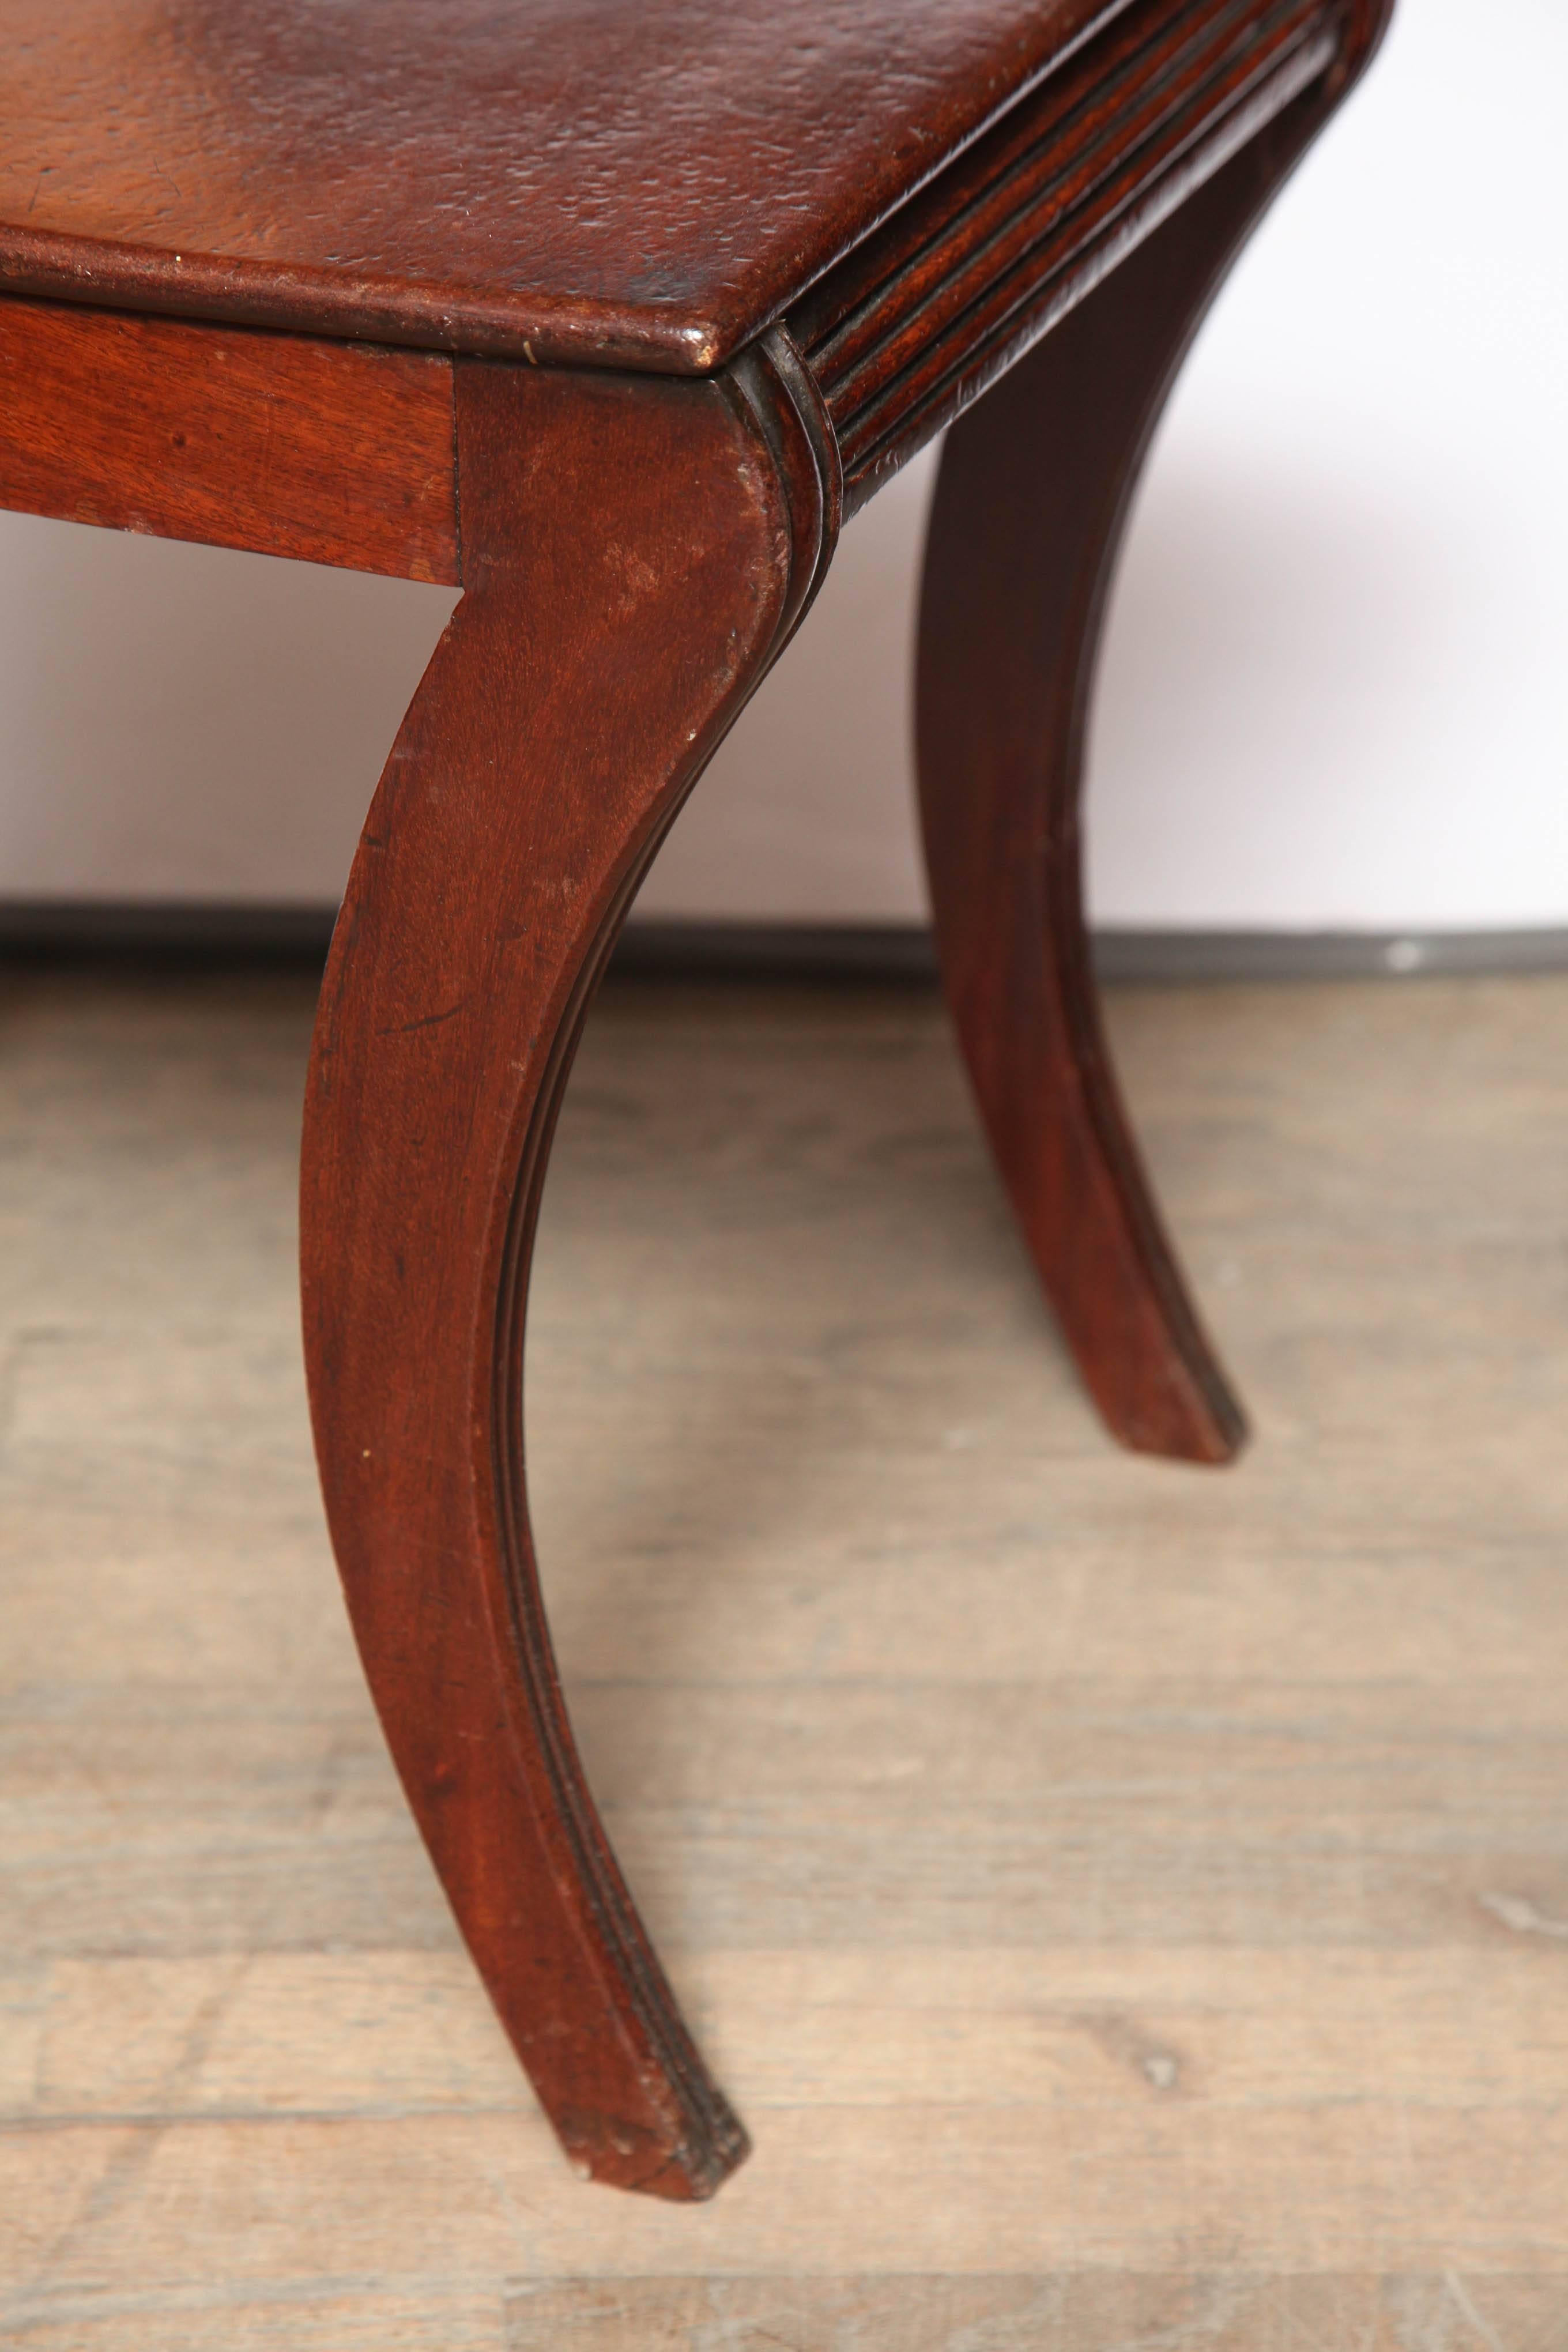 British Regency Hall Chair by Gillows of Lancaster